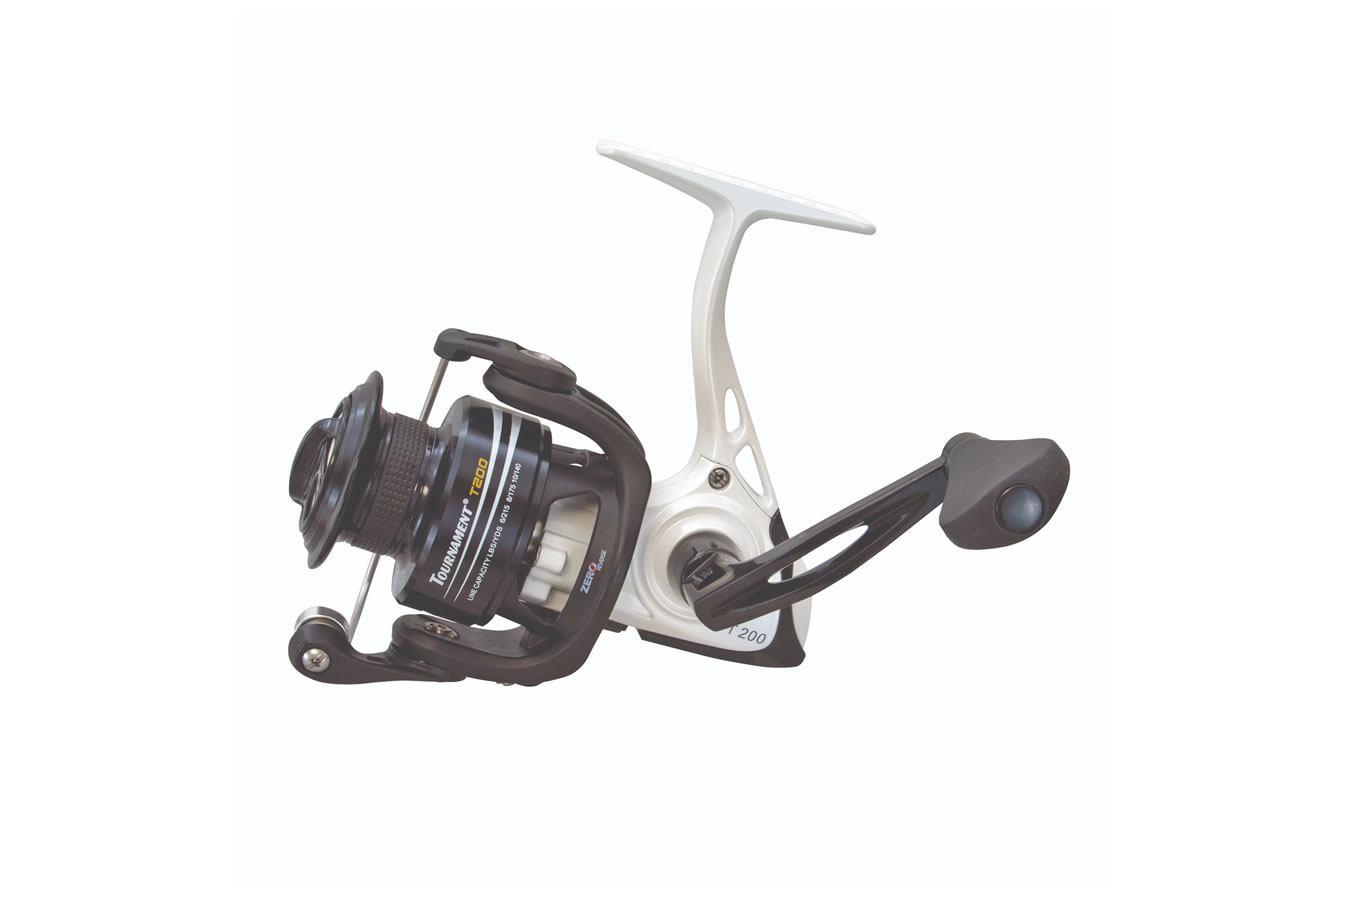 Lew'S TOURNAMENT METAL SPEED Spin T100 Spinning Reel ~ NOUVEAU